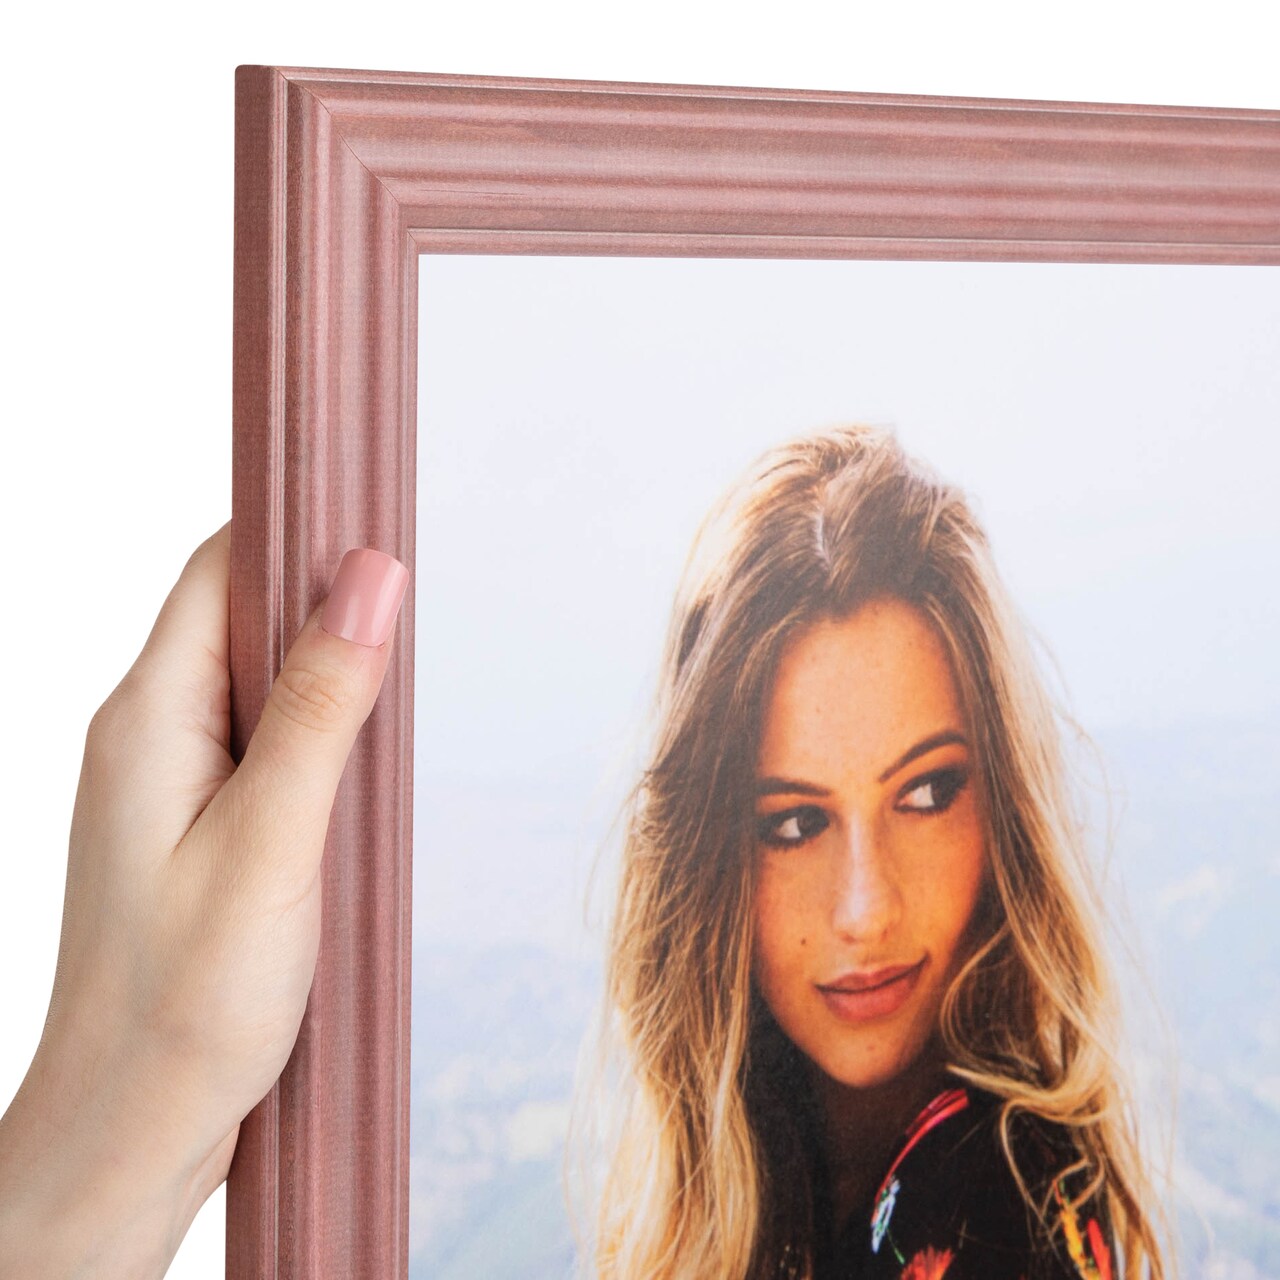 ArtToFrames 13x19 Inch  Picture Frame, This 1.5 Inch Custom Wood Poster Frame is Available in Multiple Colors, Great for Your Art or Photos - Comes with 060 Plexi Glass and  Corrugated Backing (A7JH)